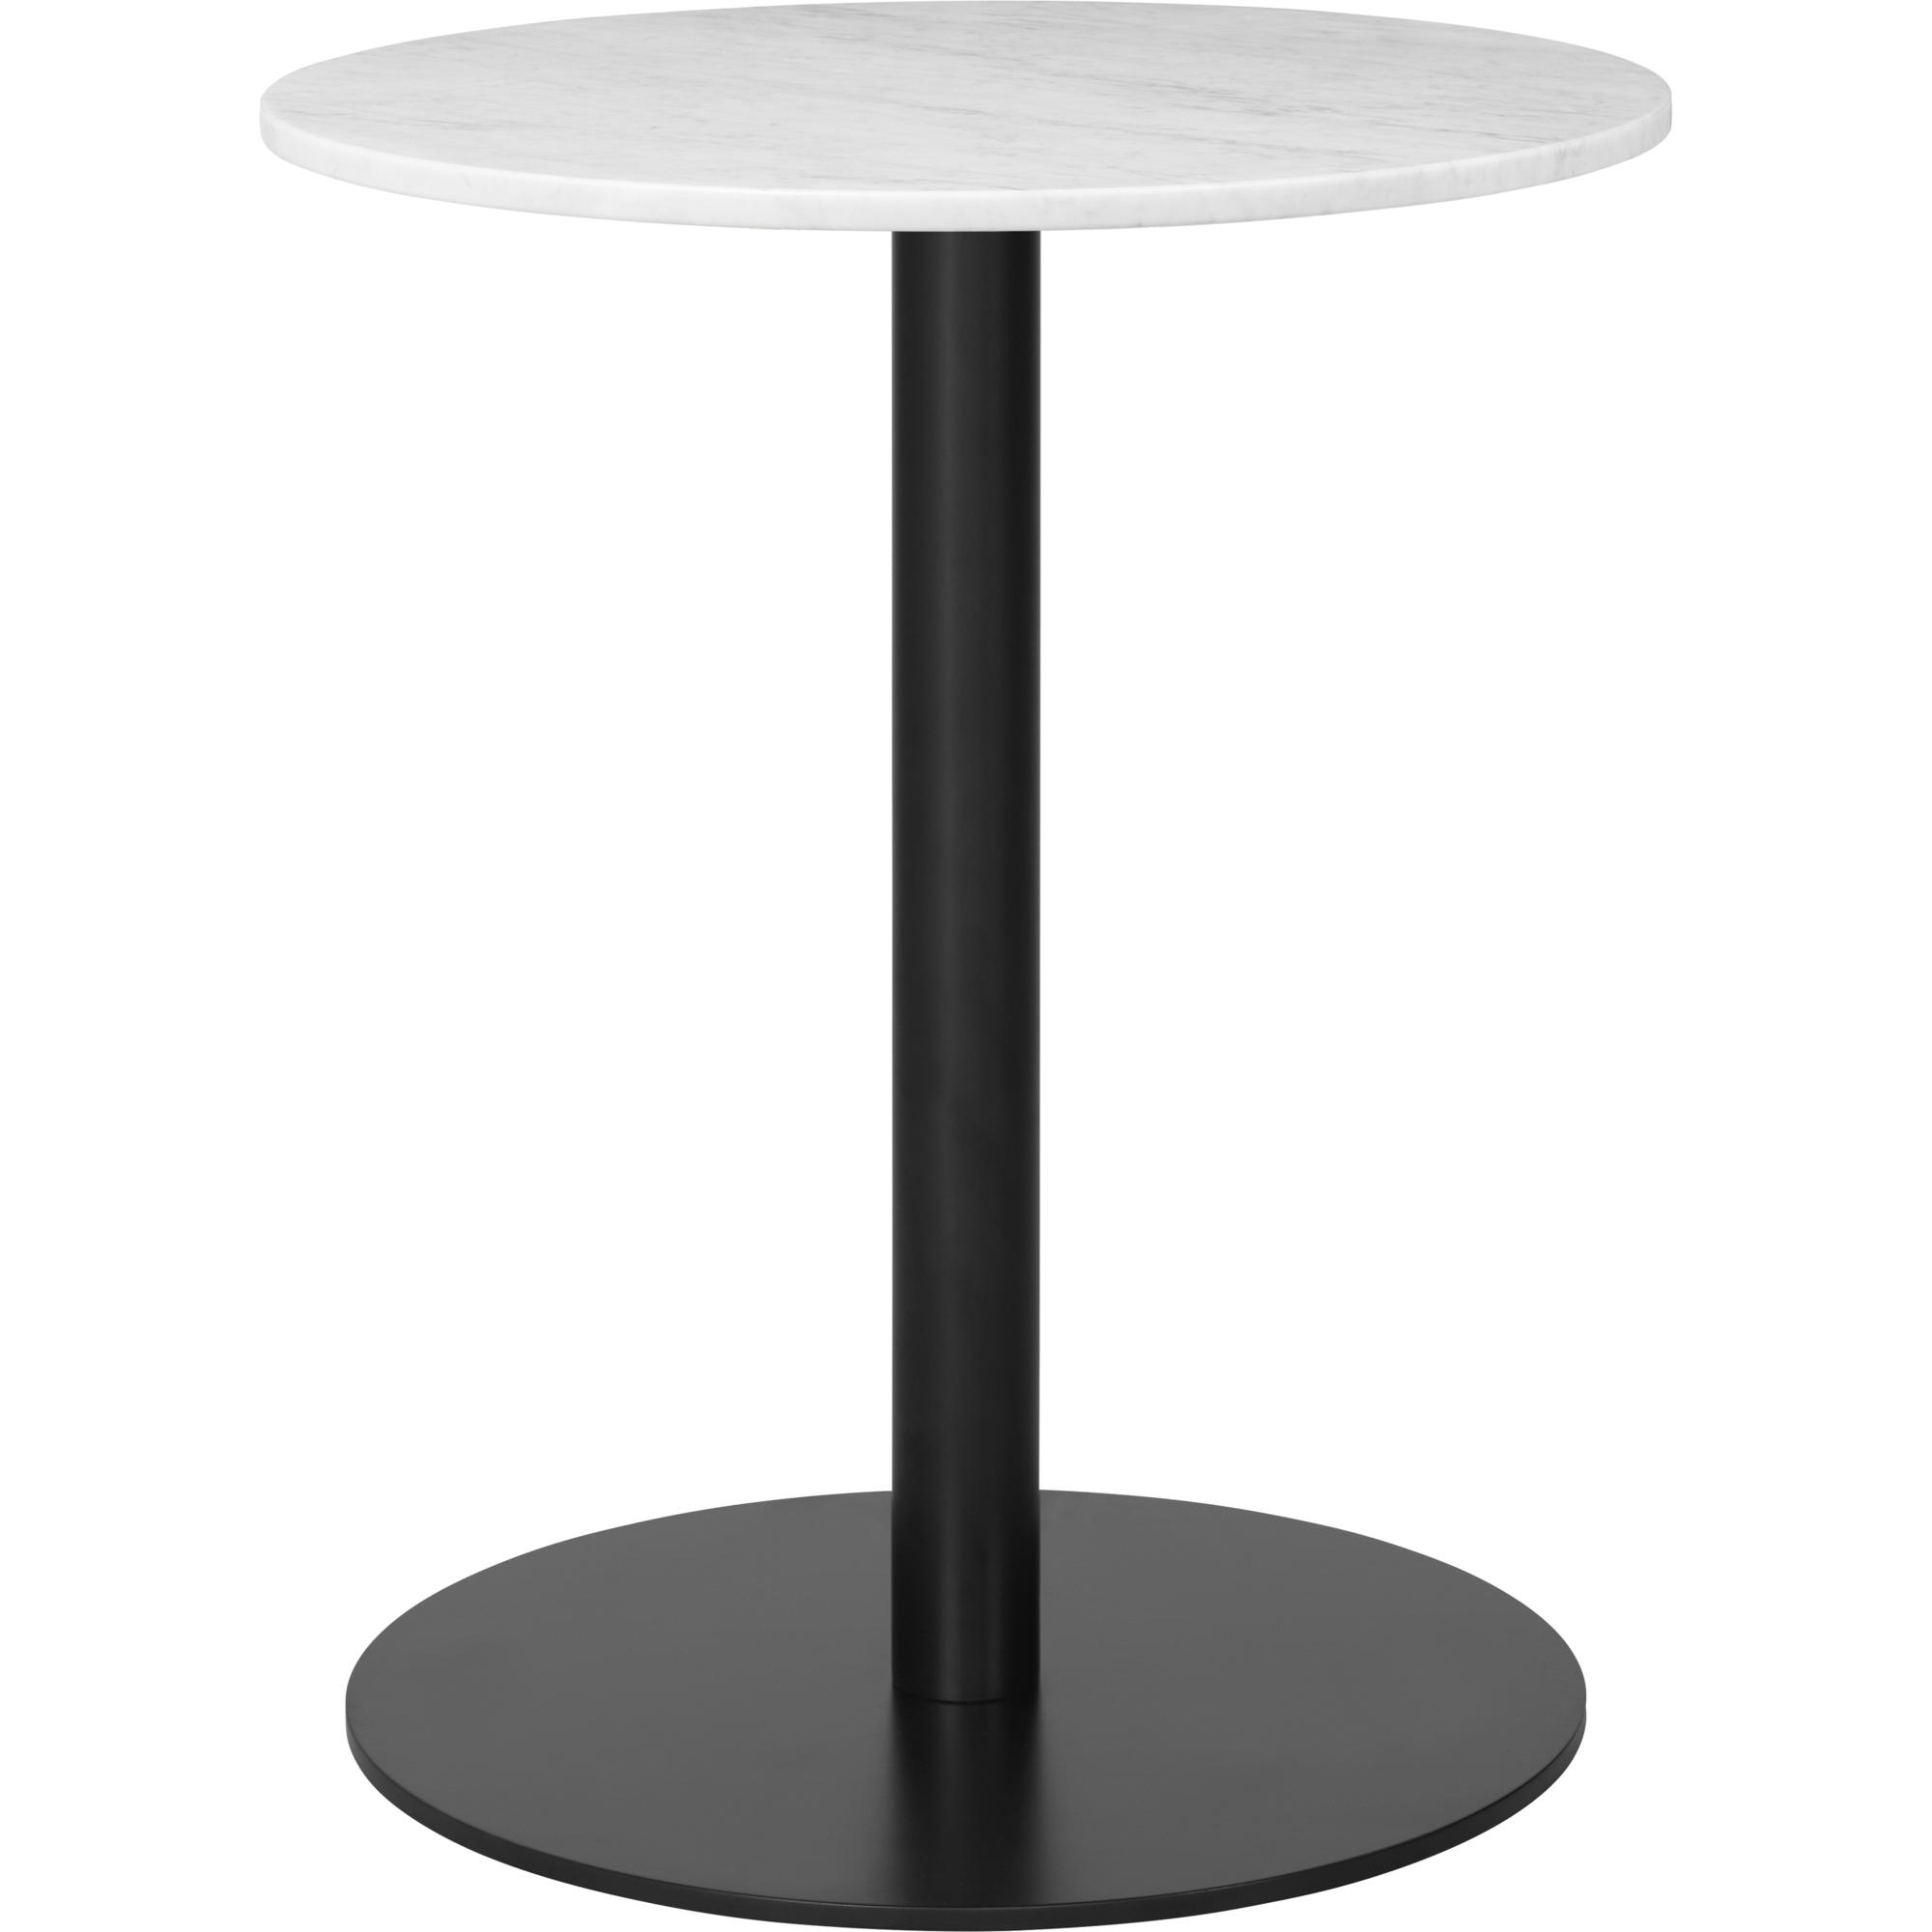 GUBI 1.0 Dining Table Round Ø60 cm w. Black Base and White Carrara Marble Top